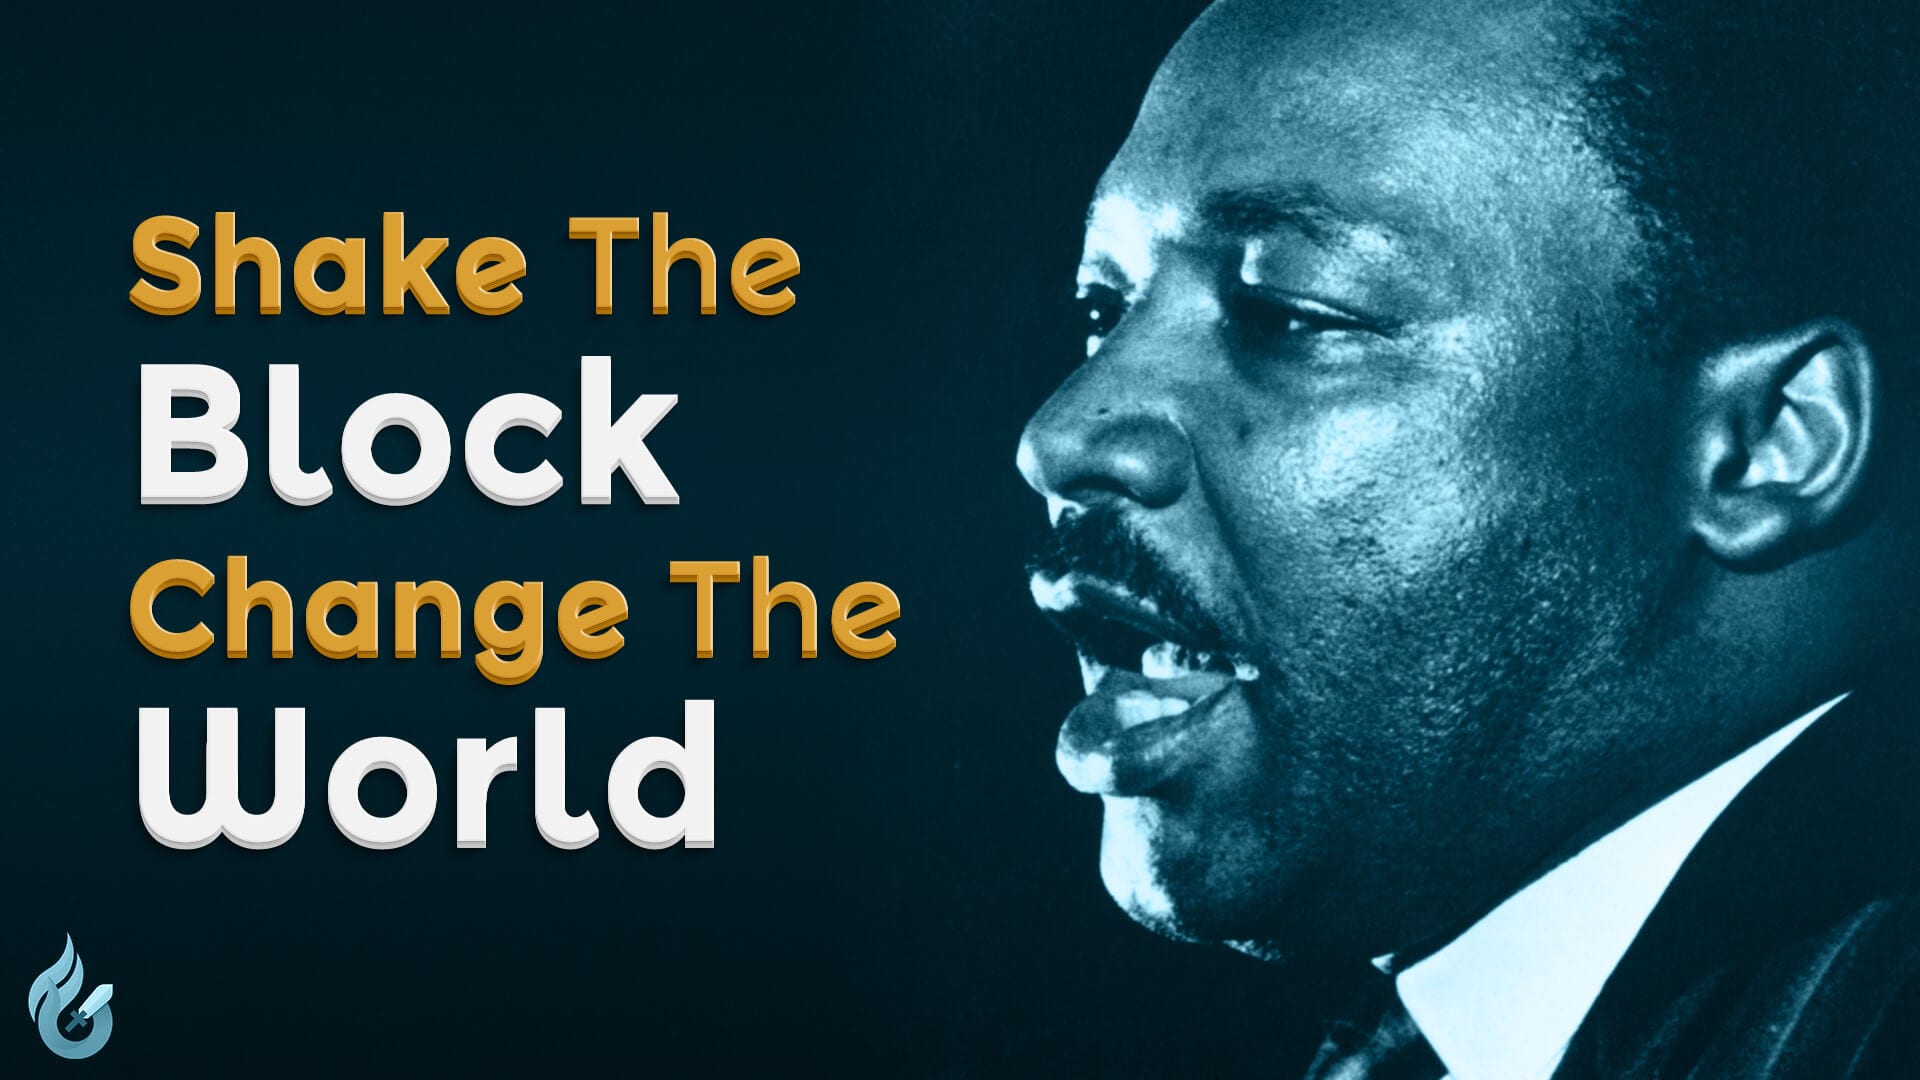 Shake The Block Change The World - Martin Luther King Jr